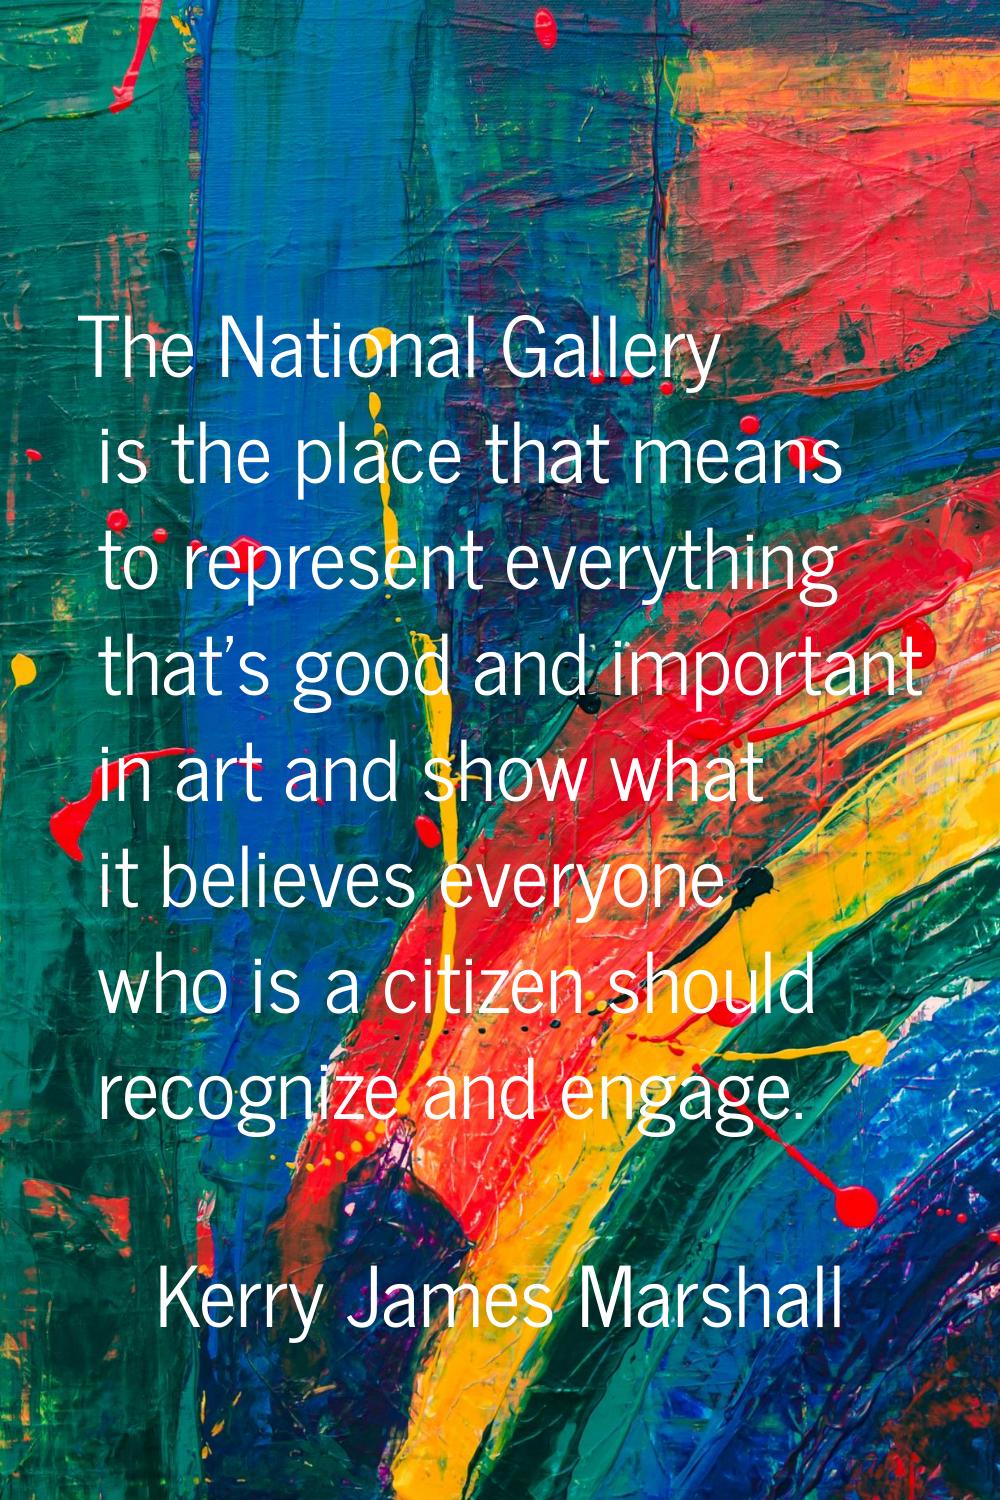 The National Gallery is the place that means to represent everything that's good and important in a